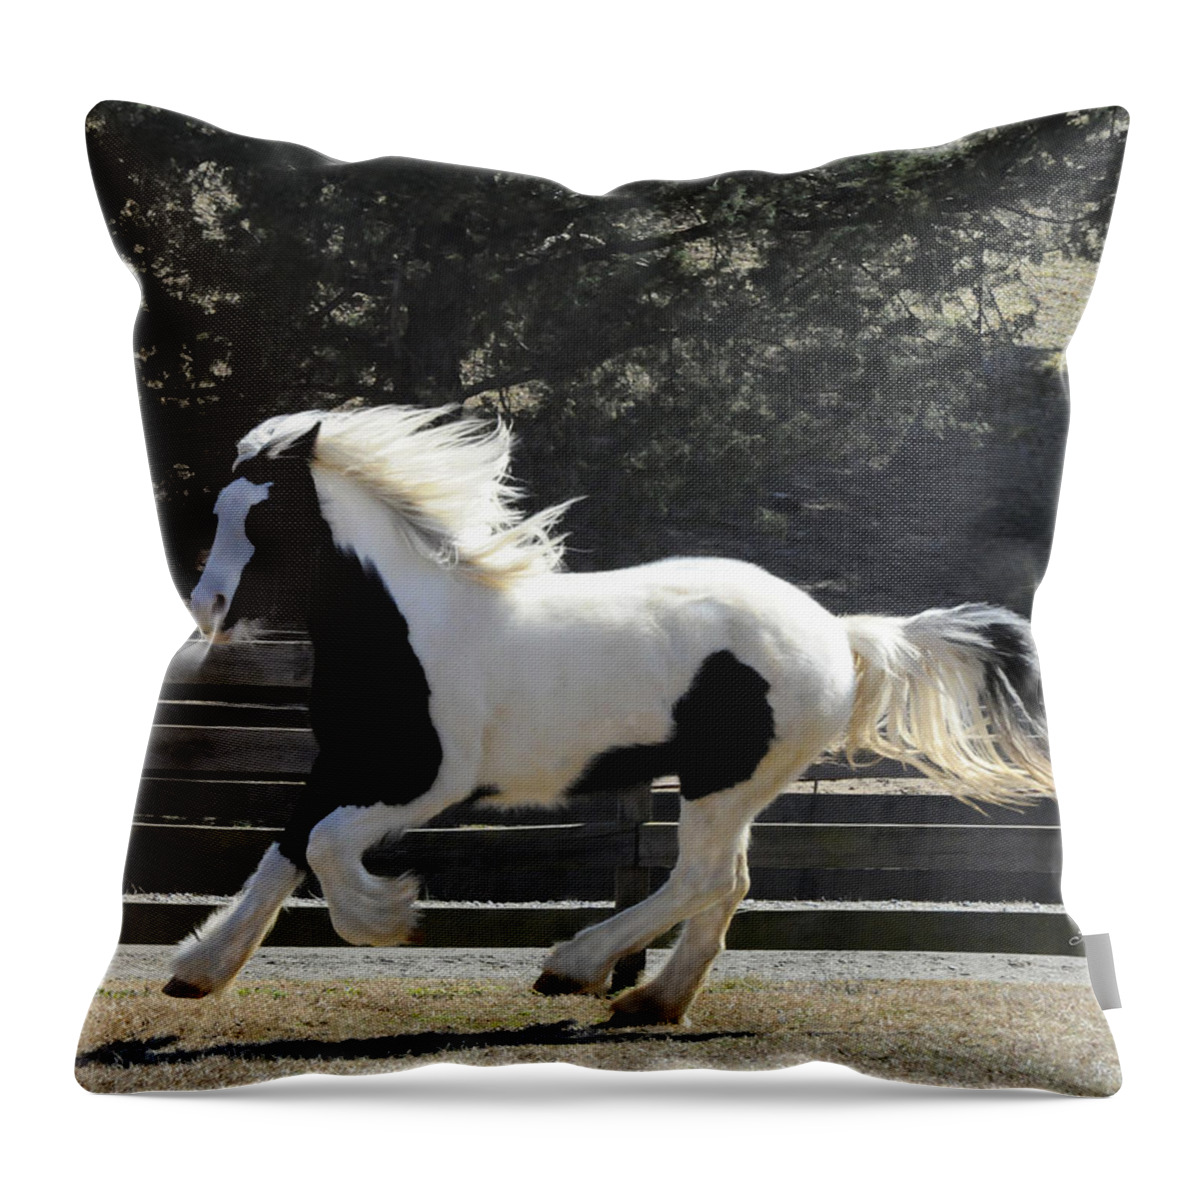  Throw Pillow featuring the photograph Emma So Graceful by Terry Kirkland Cook